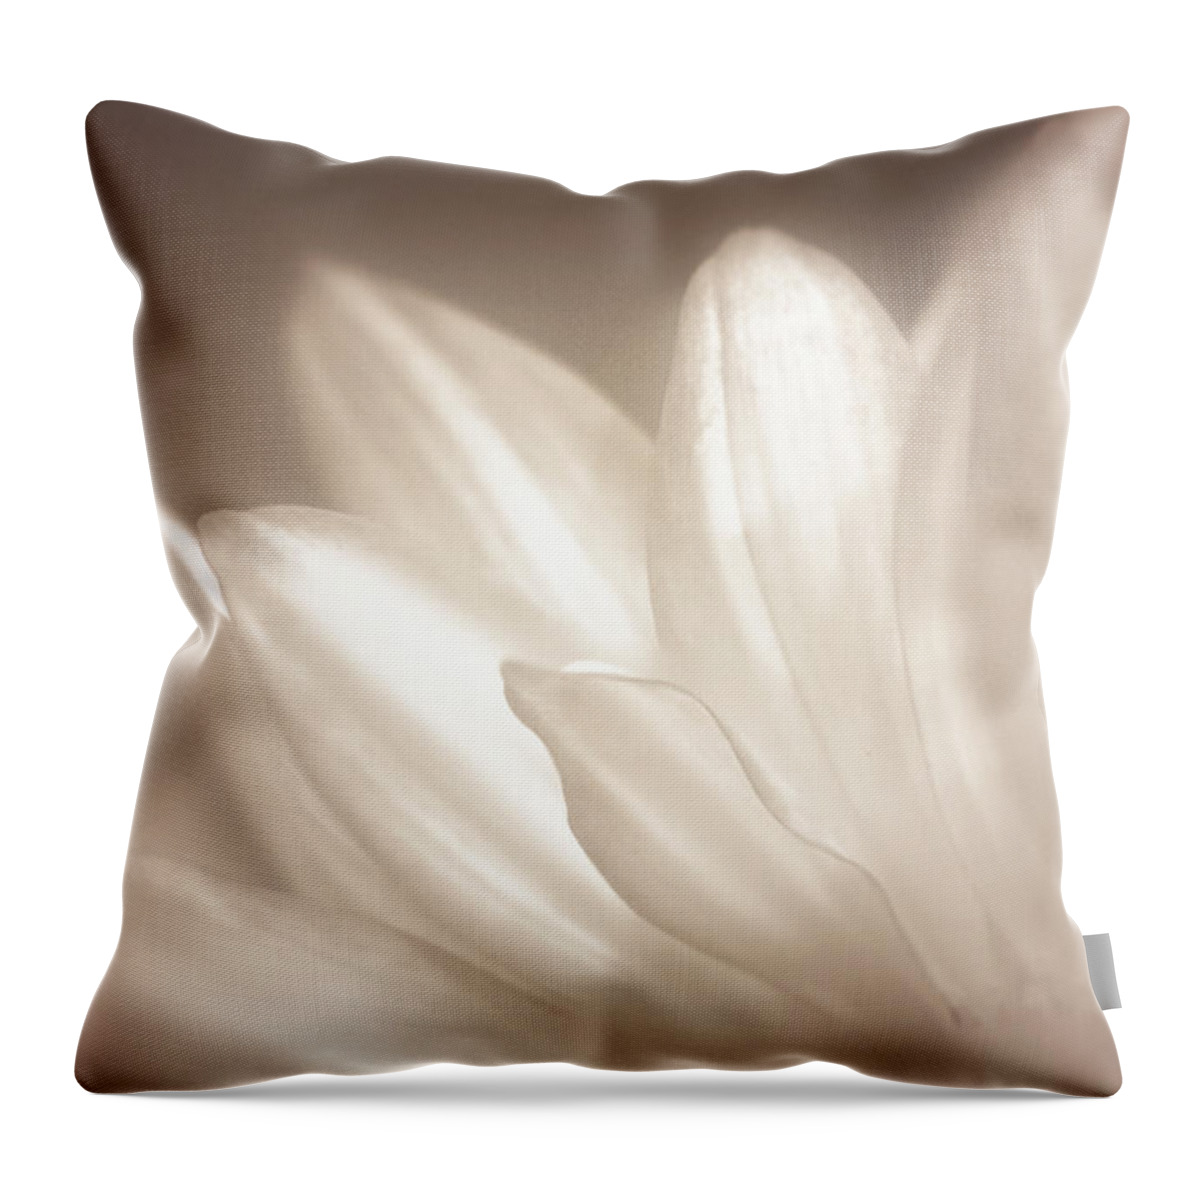 Bloom Throw Pillow featuring the photograph Delicate by Scott Norris